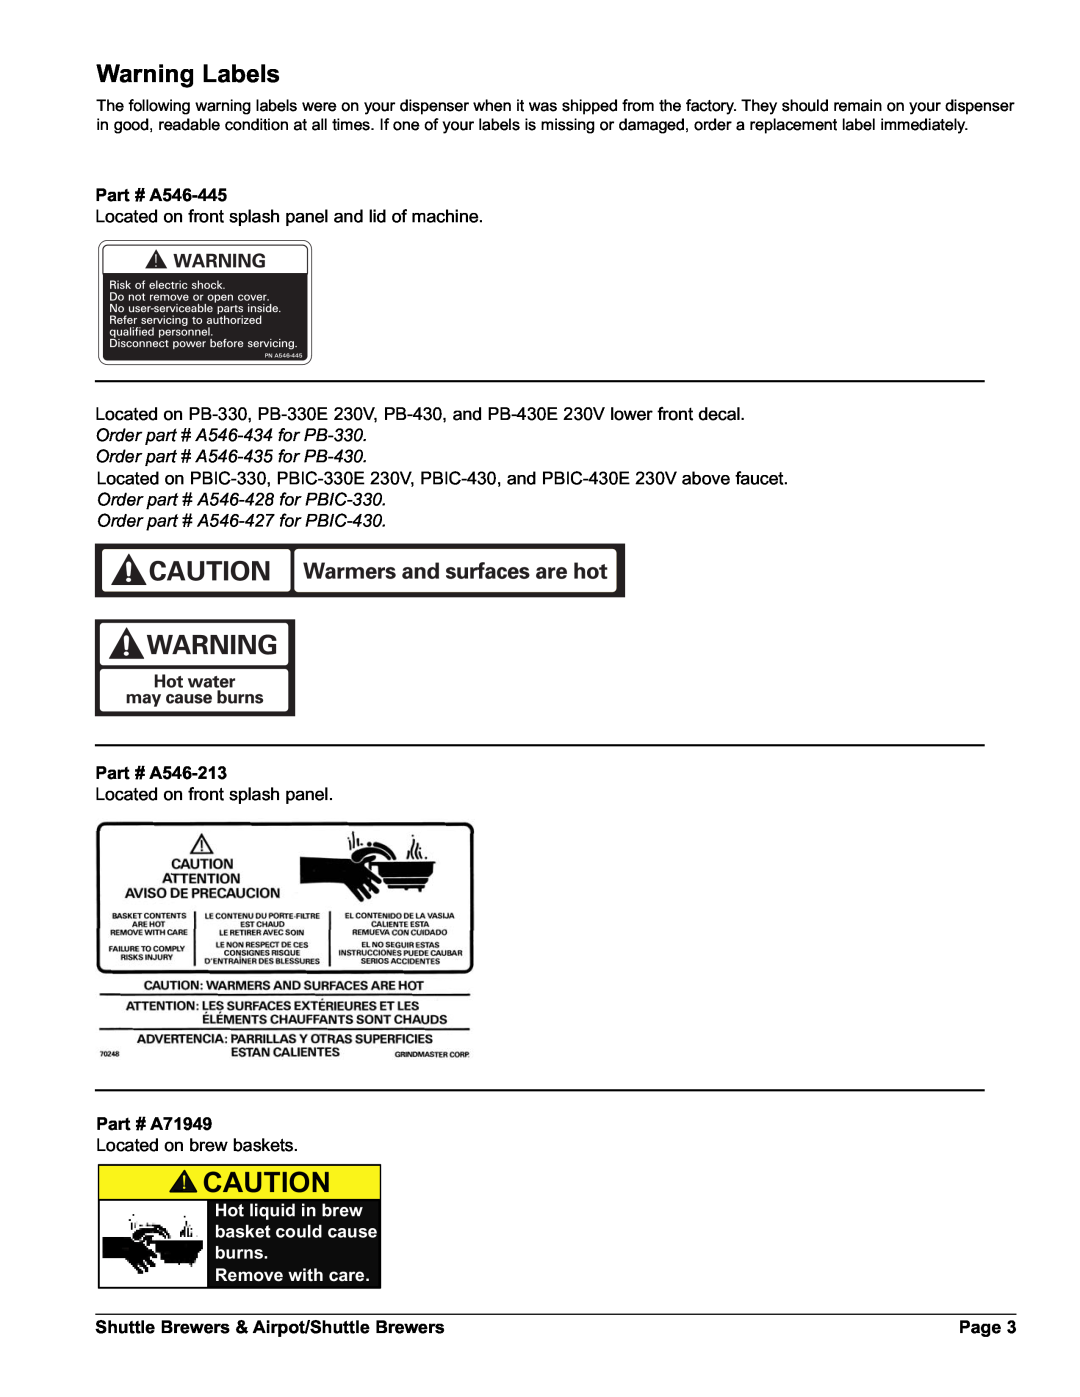 Grindmaster AM-344-04 Warning Labels, A546-445, Order part # A546-434for PB-330, Order part # A546-435for PB-430, A546-213 